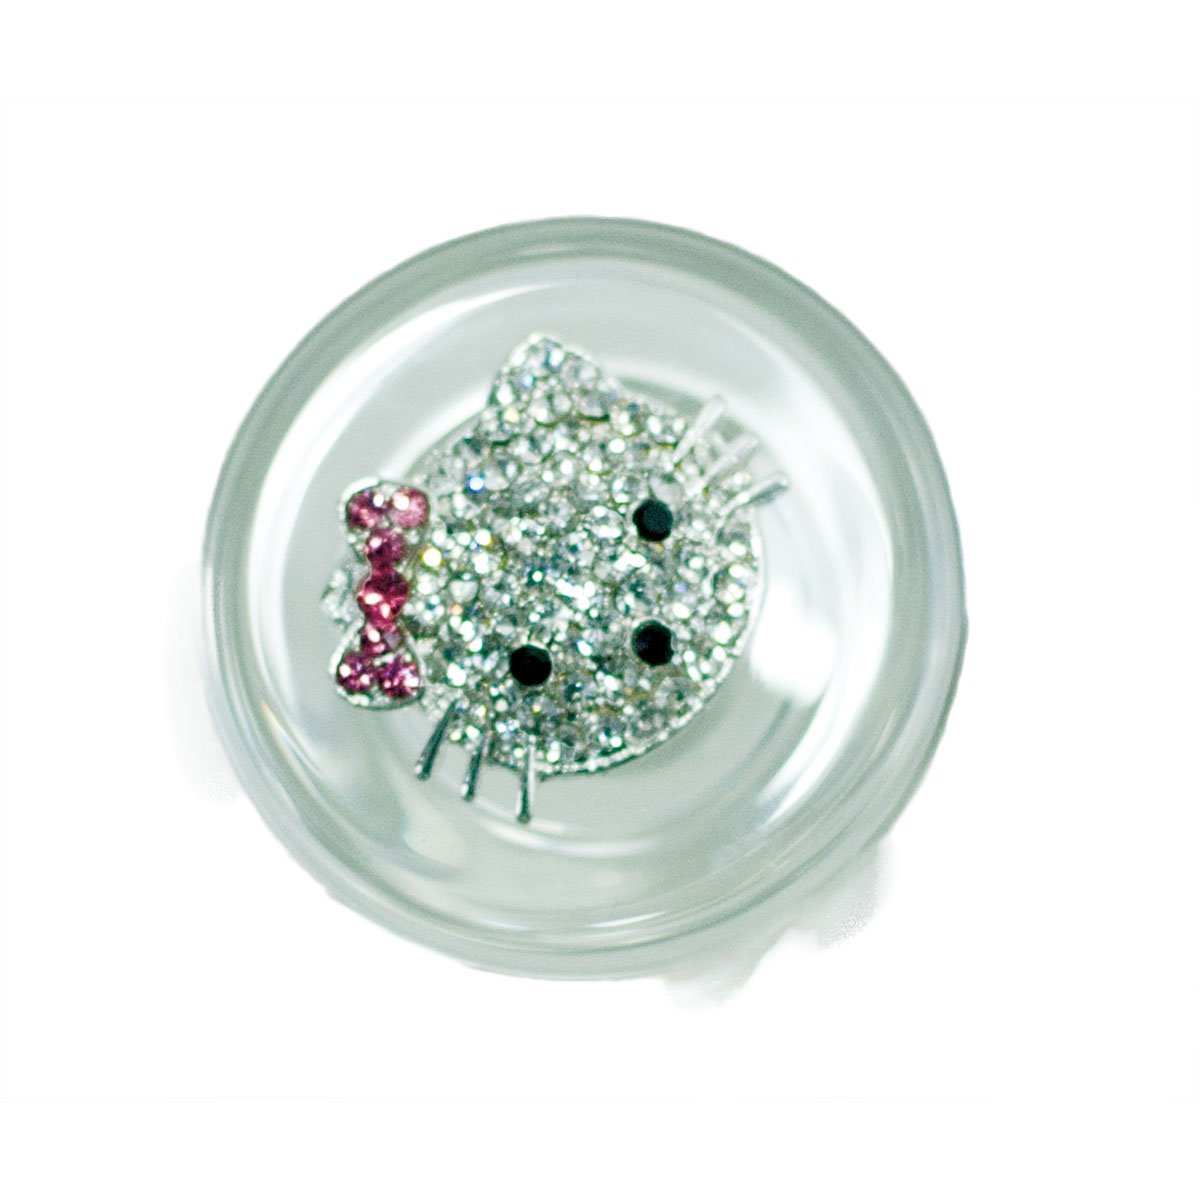 Crystal Delights Kitty Plug - Buy At Luxury Toy X - Free 3-Day Shipping